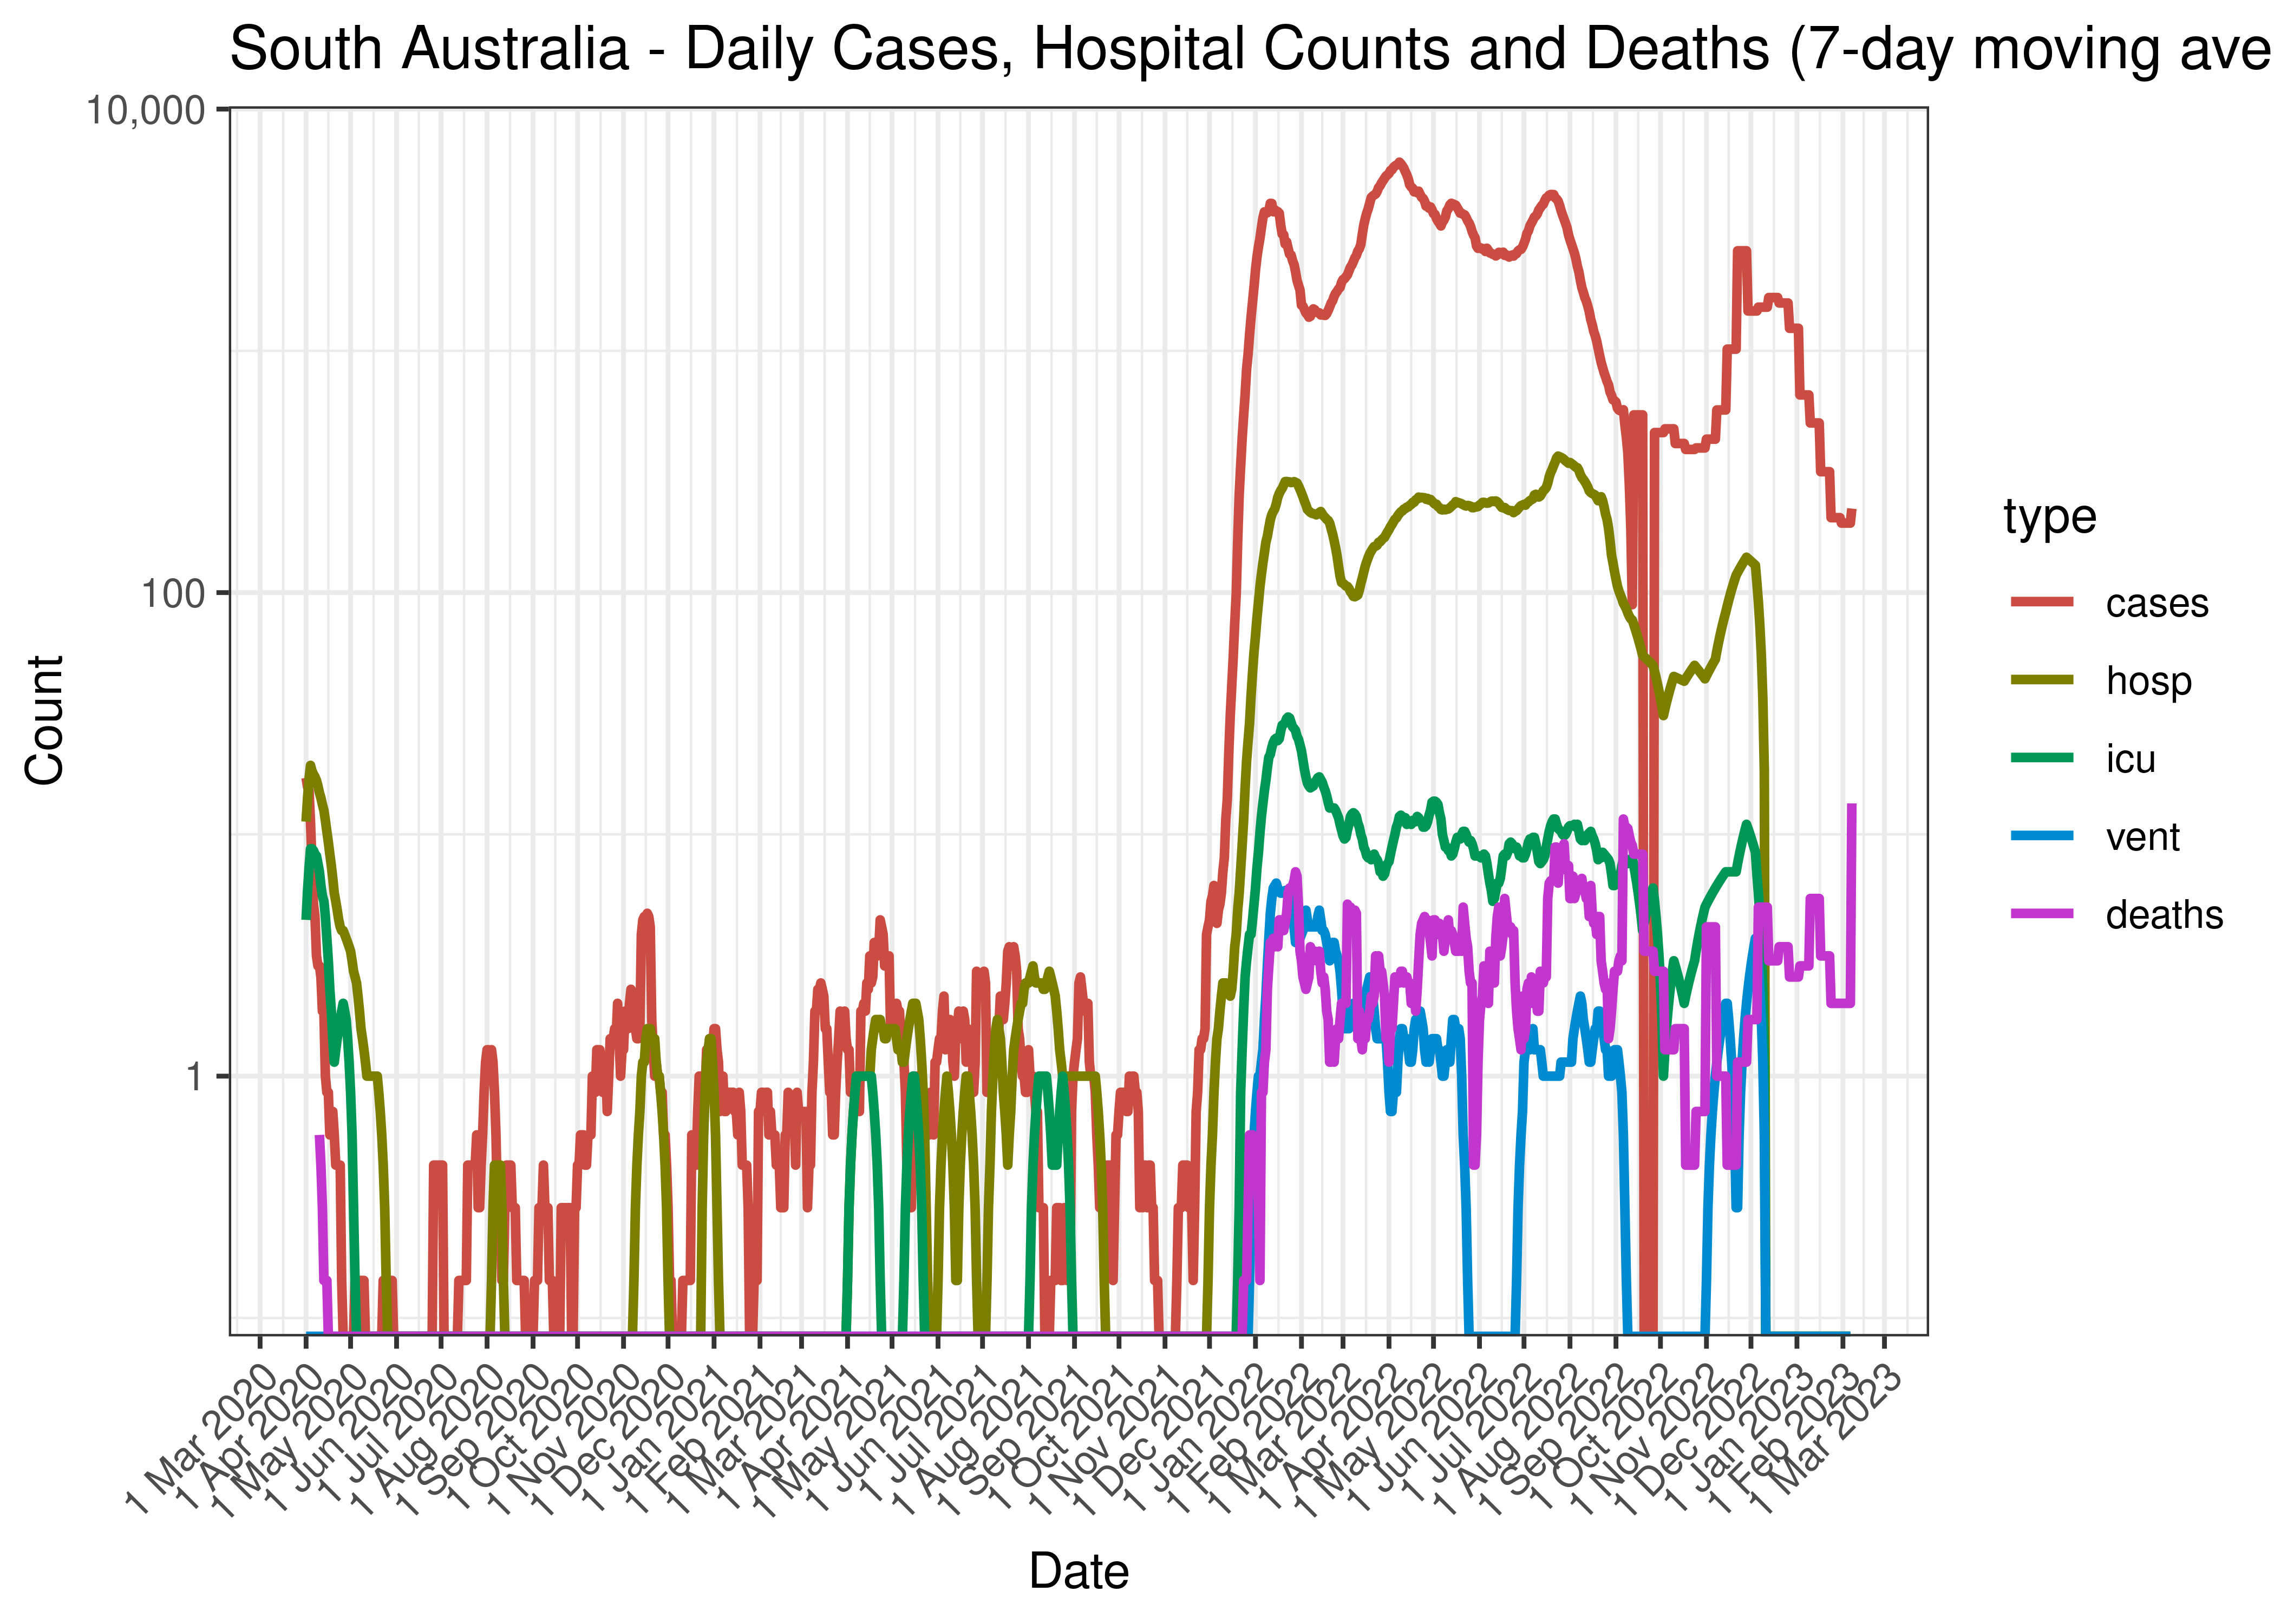 South Australia - Daily Cases, Hospital Counts and Deaths (7-day moving average)